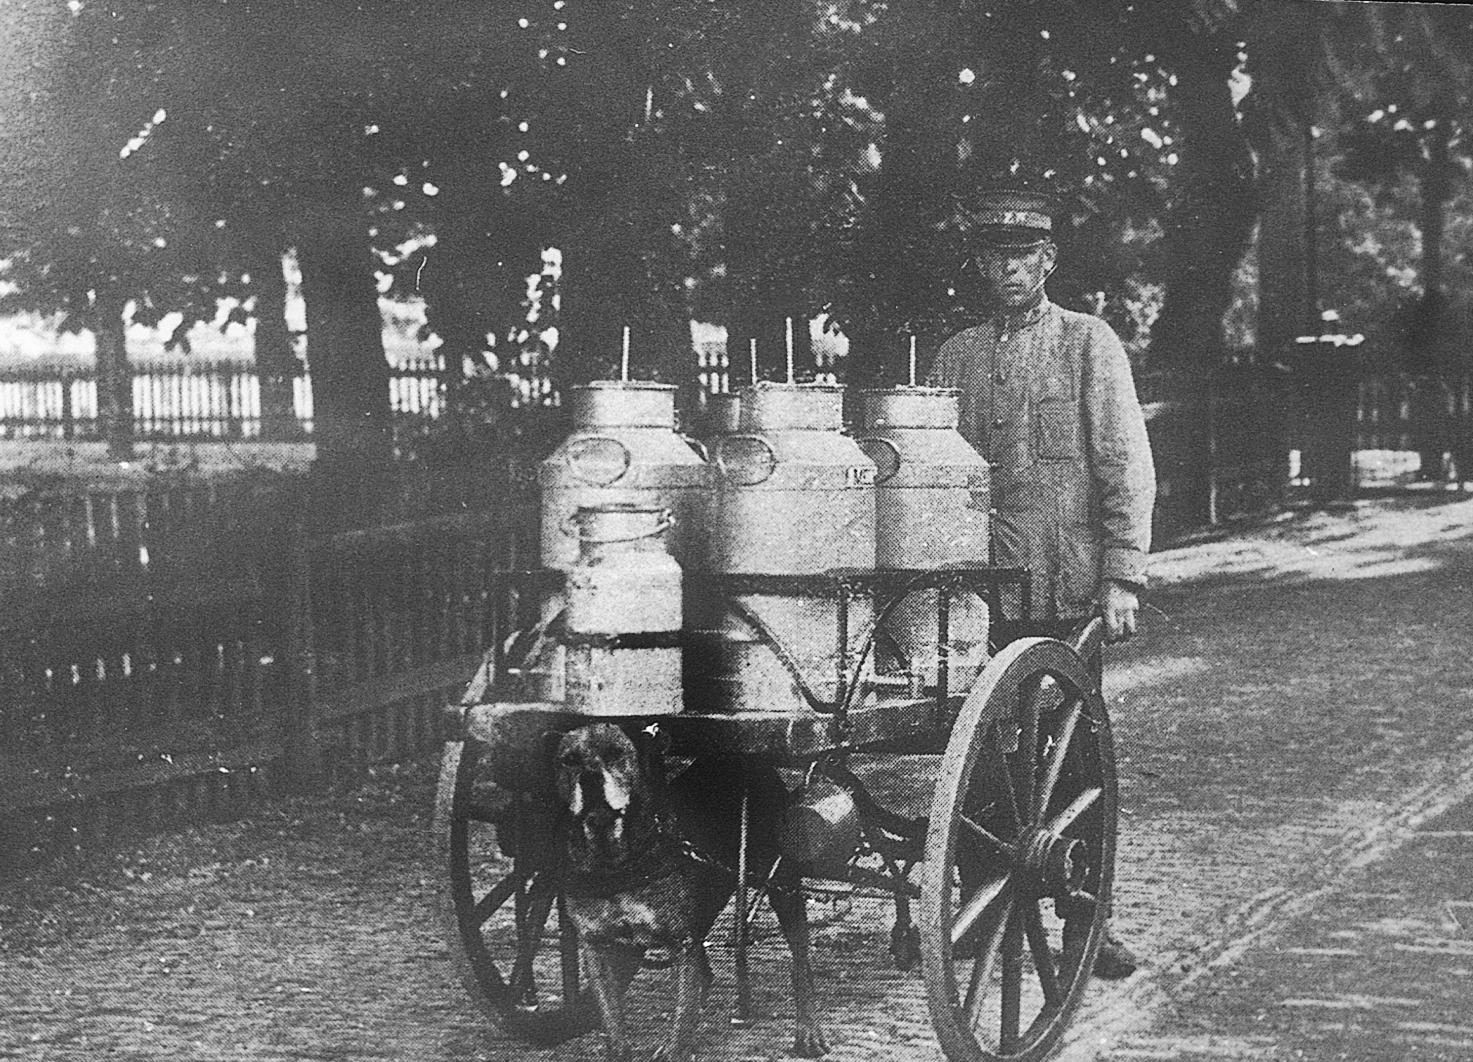 Image of a farmer pushing a cart of milk